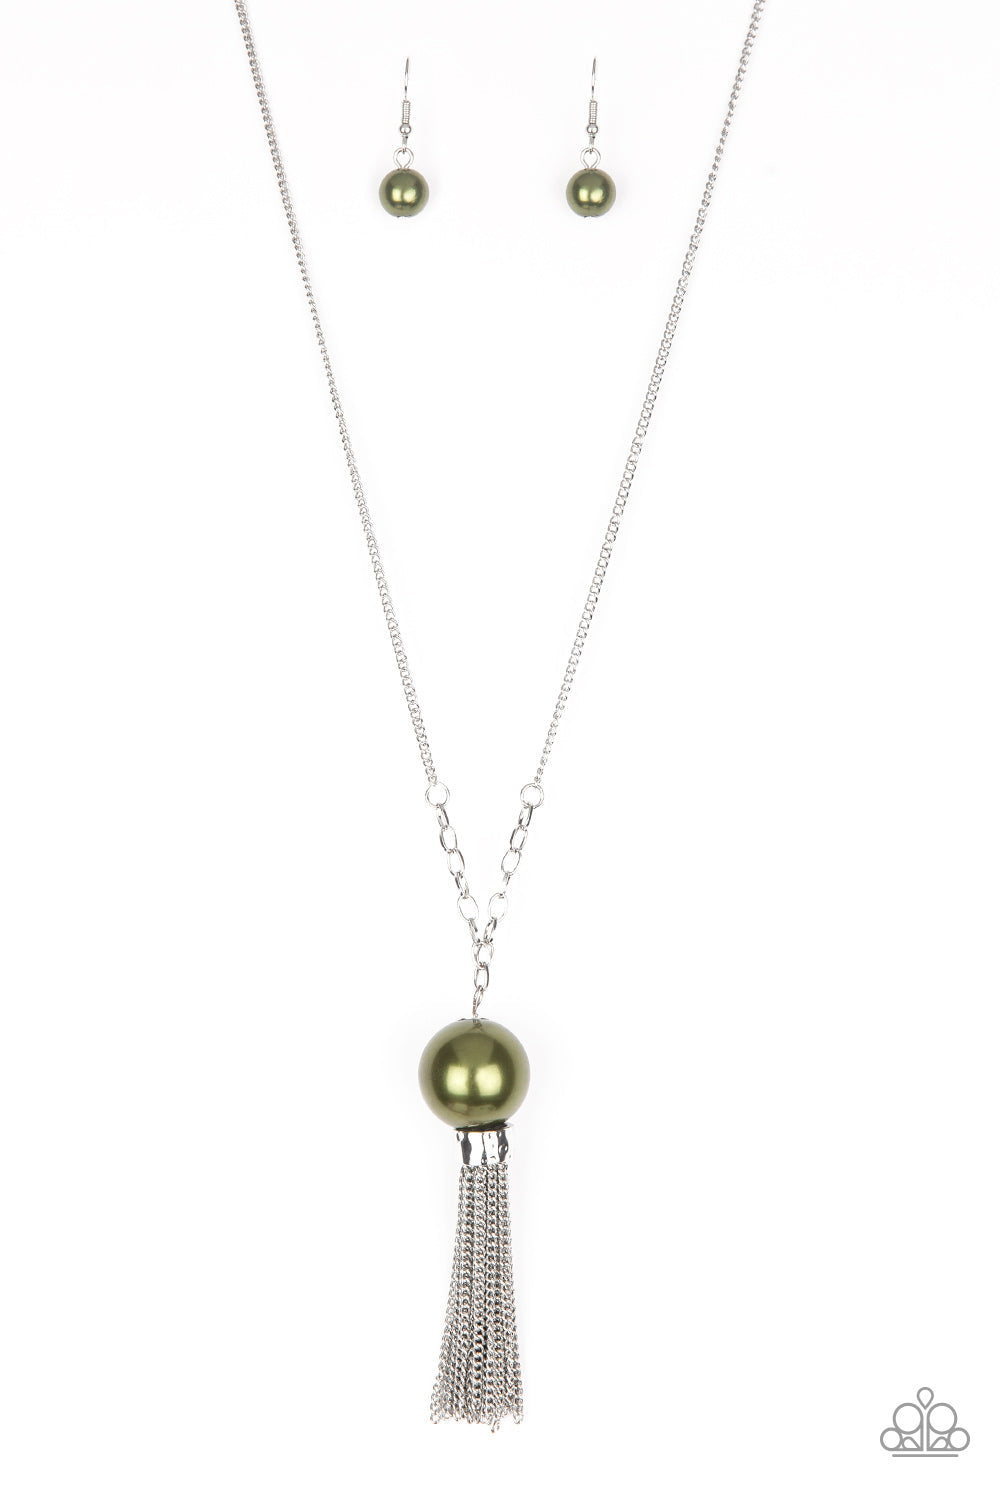 Belle Of The BALLROOM - Green and Silver Necklace - Paparazzi Accessories - A dramatic pearly green bead swings from the bottom of an elegantly elongated silver chain. Featuring a hammered fitting, a silver tassel streams from the bottom of the colorful pendant for a whimsical finish. Features an adjustable clasp closure. Sold as one individual necklace.